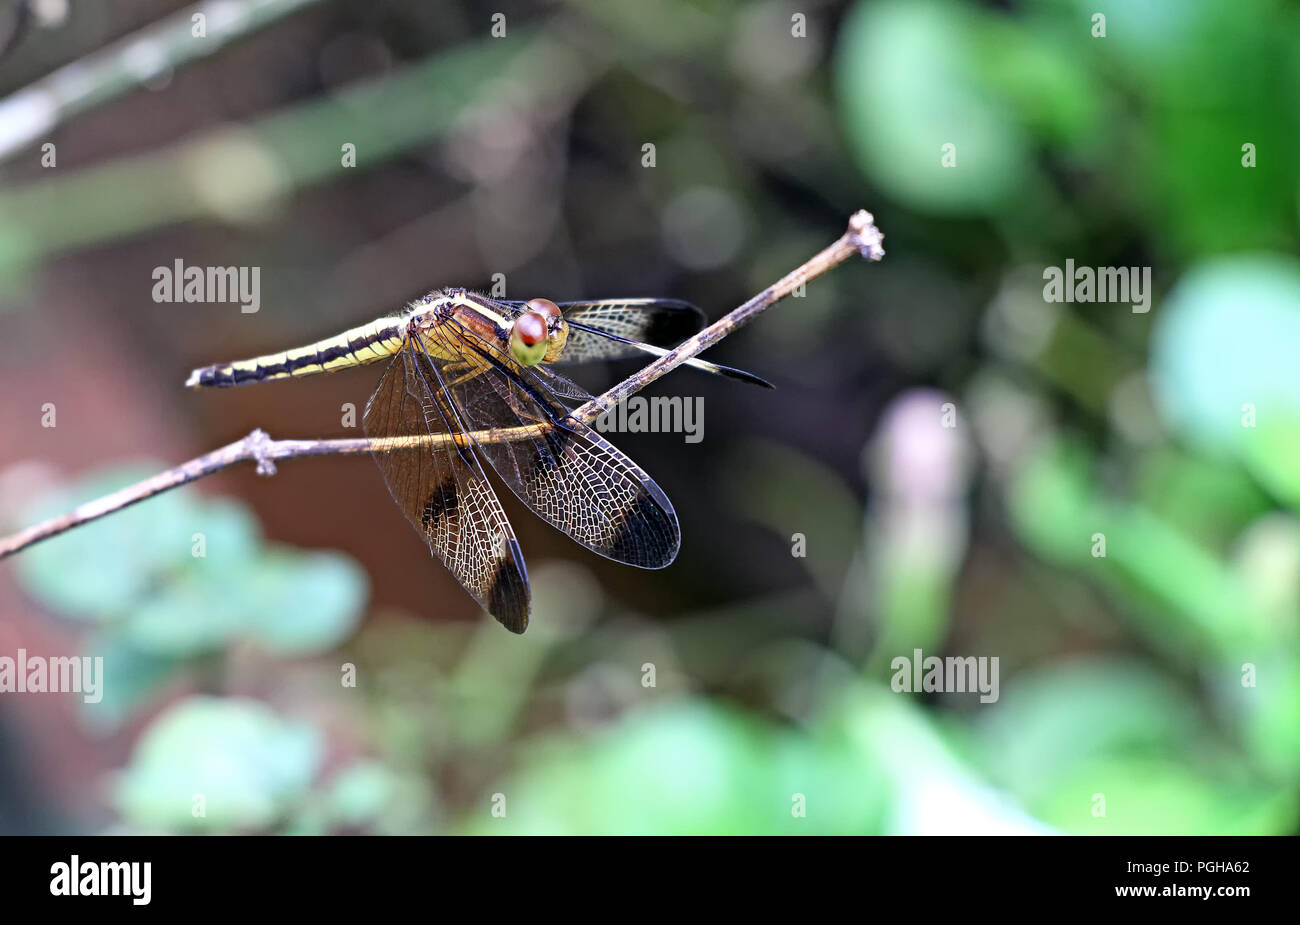 Colorful dragon fly perched on dry plant twig Stock Photo